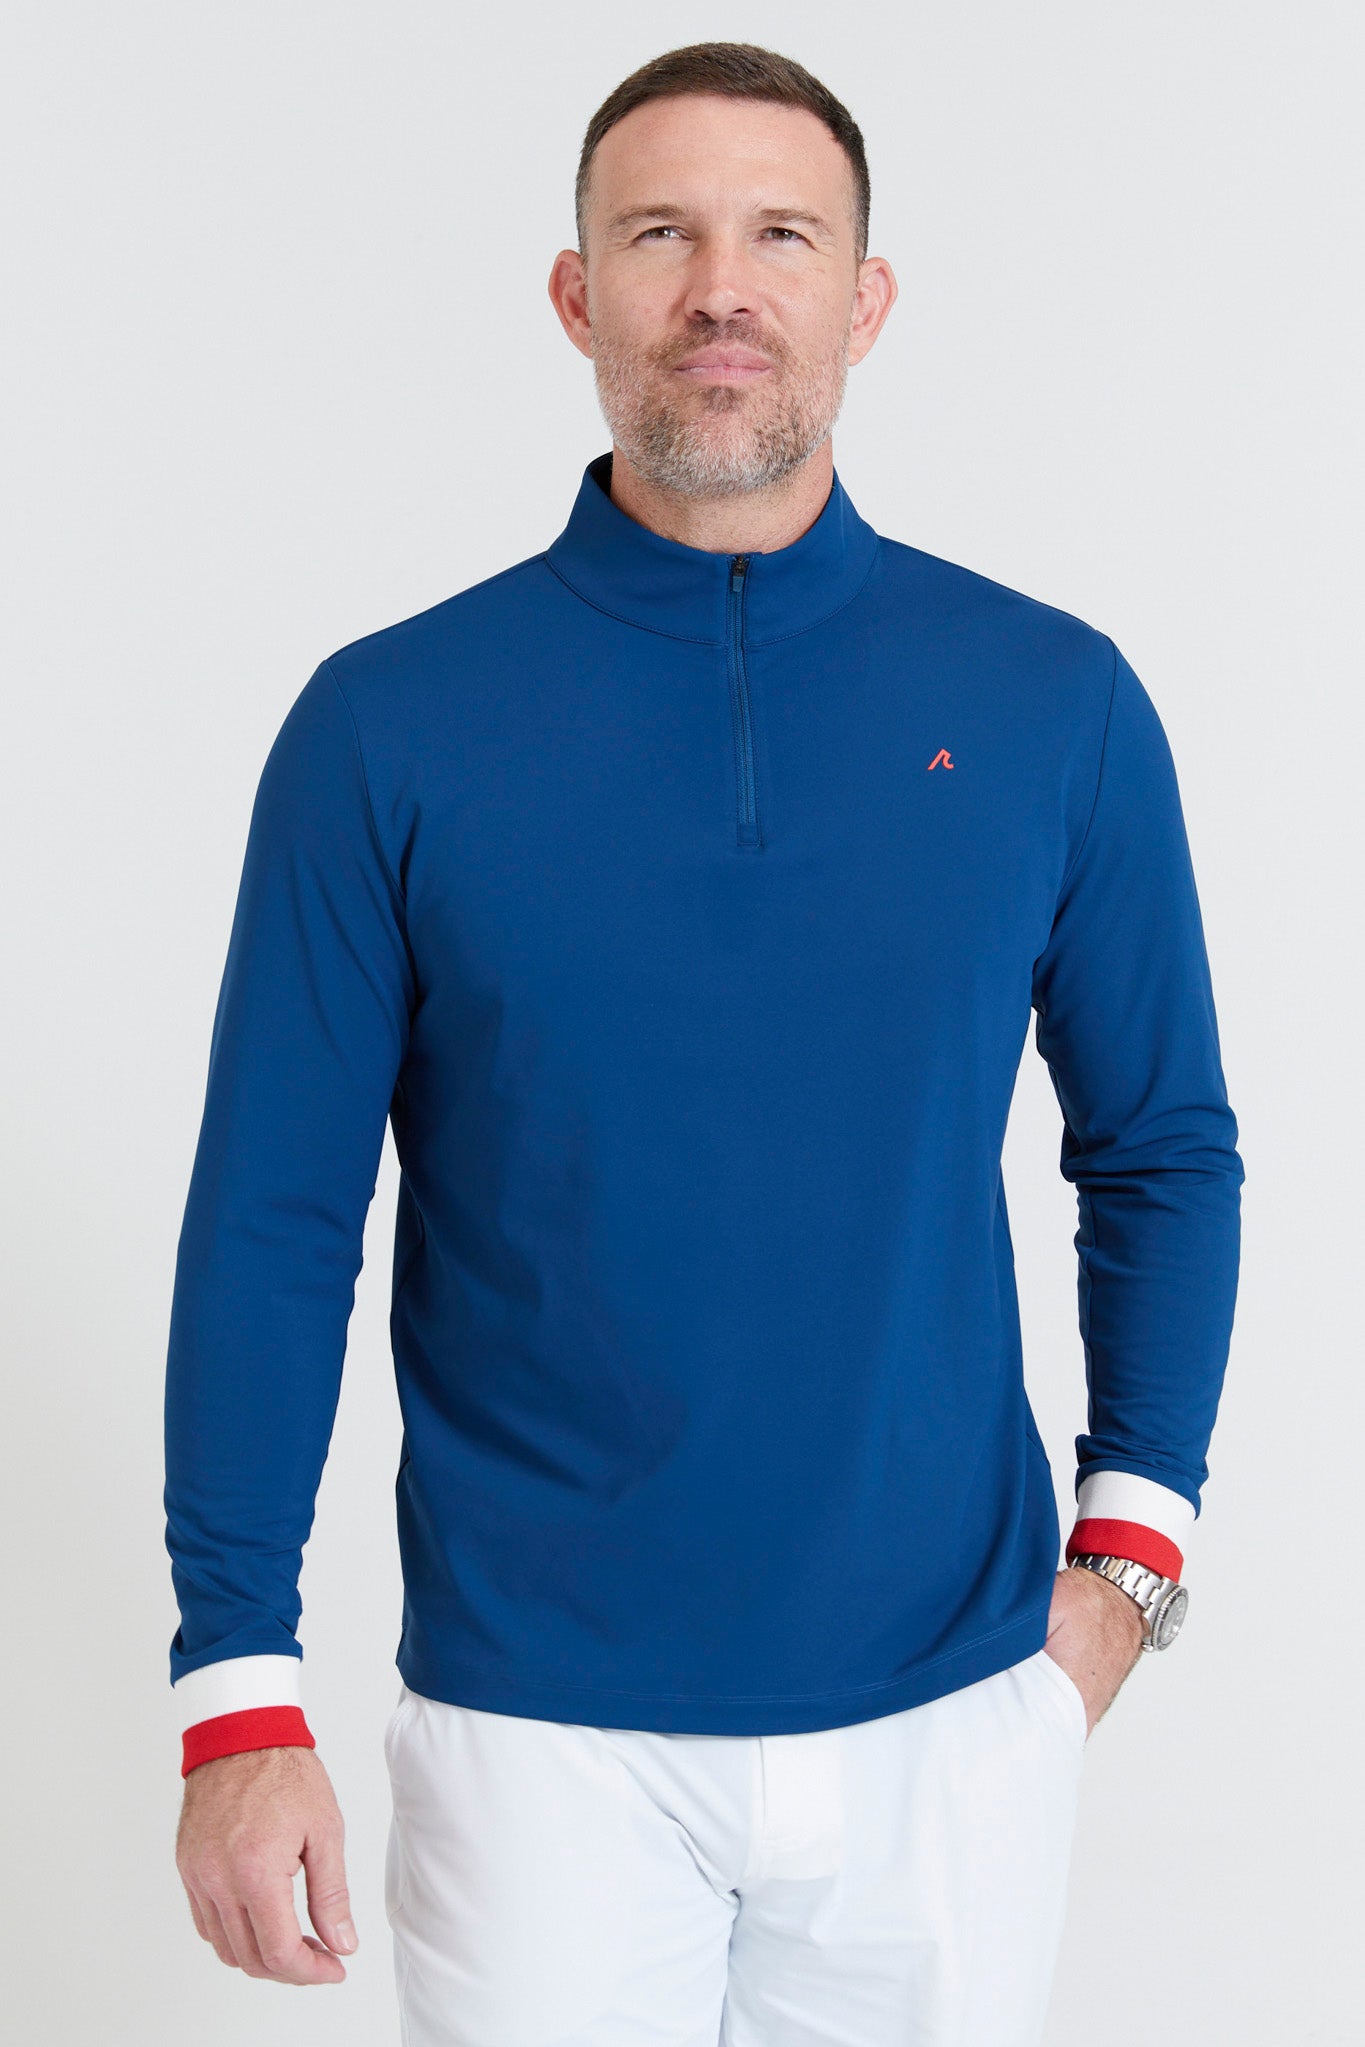 Image of the hubbard quarter zip in admiral ss23